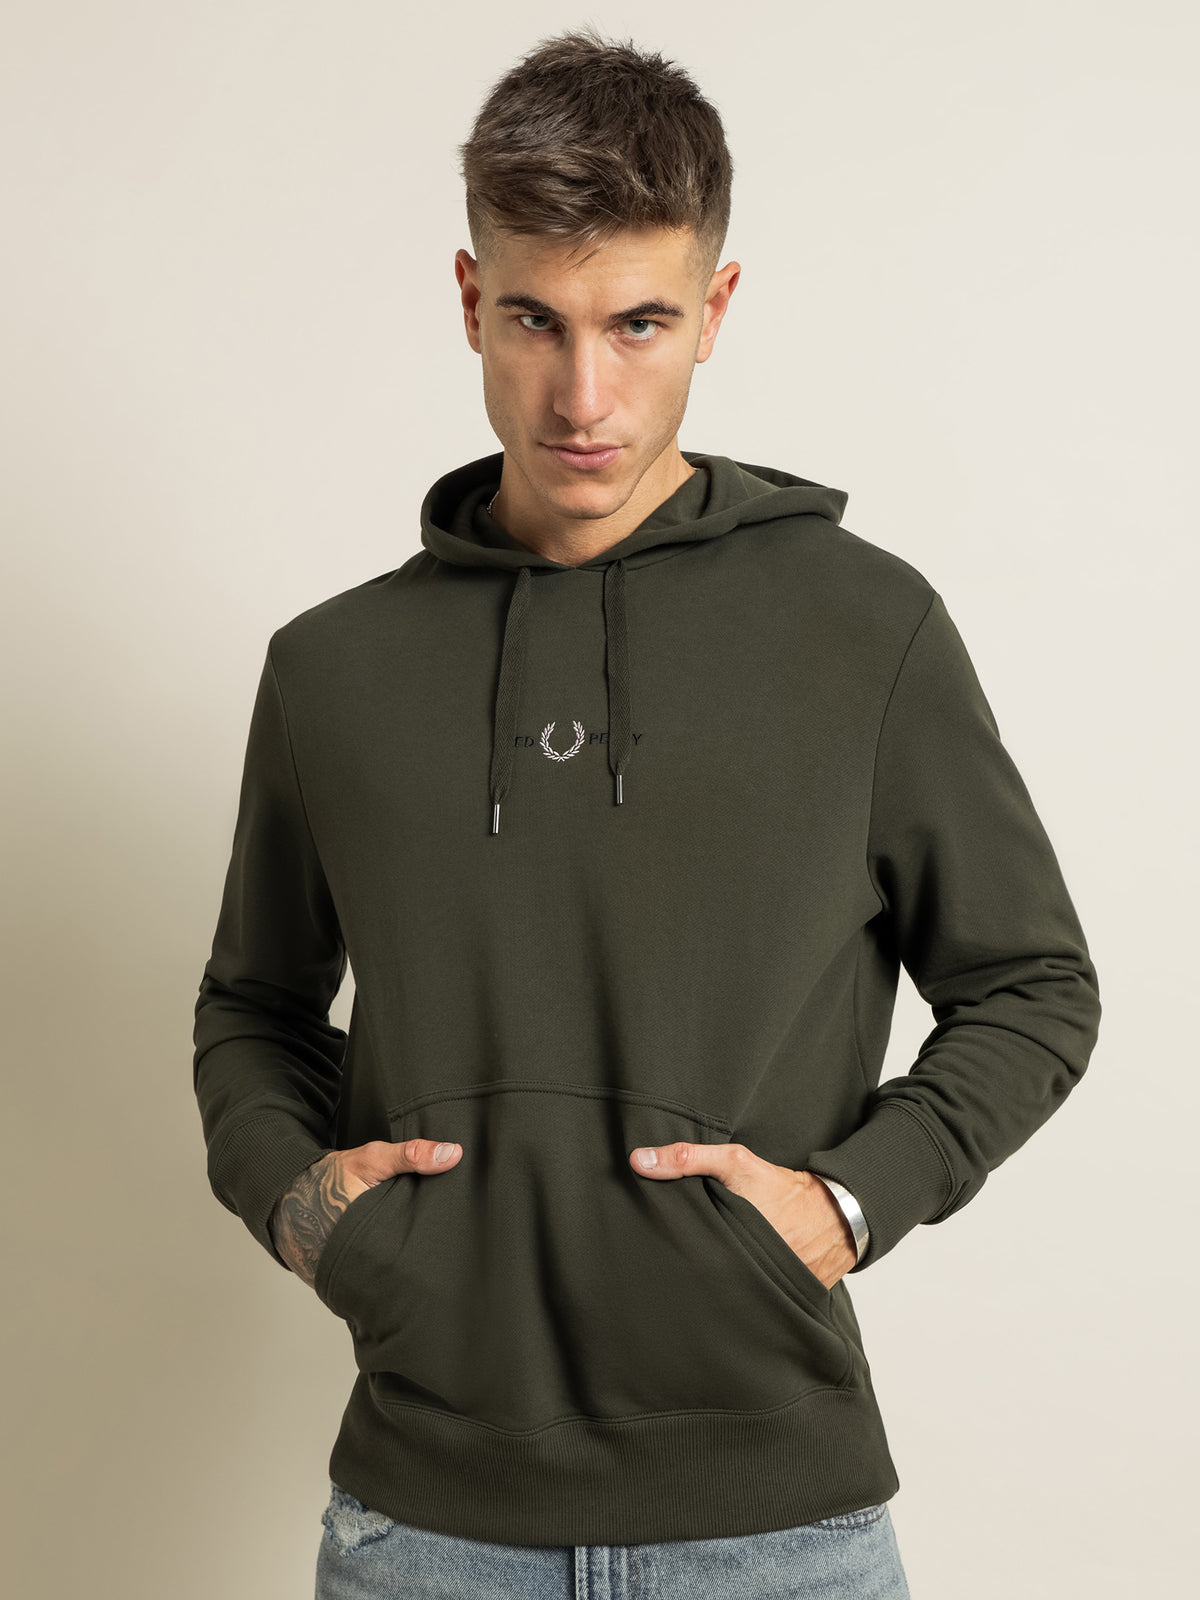 Embroidered Hoodie in Dark Green